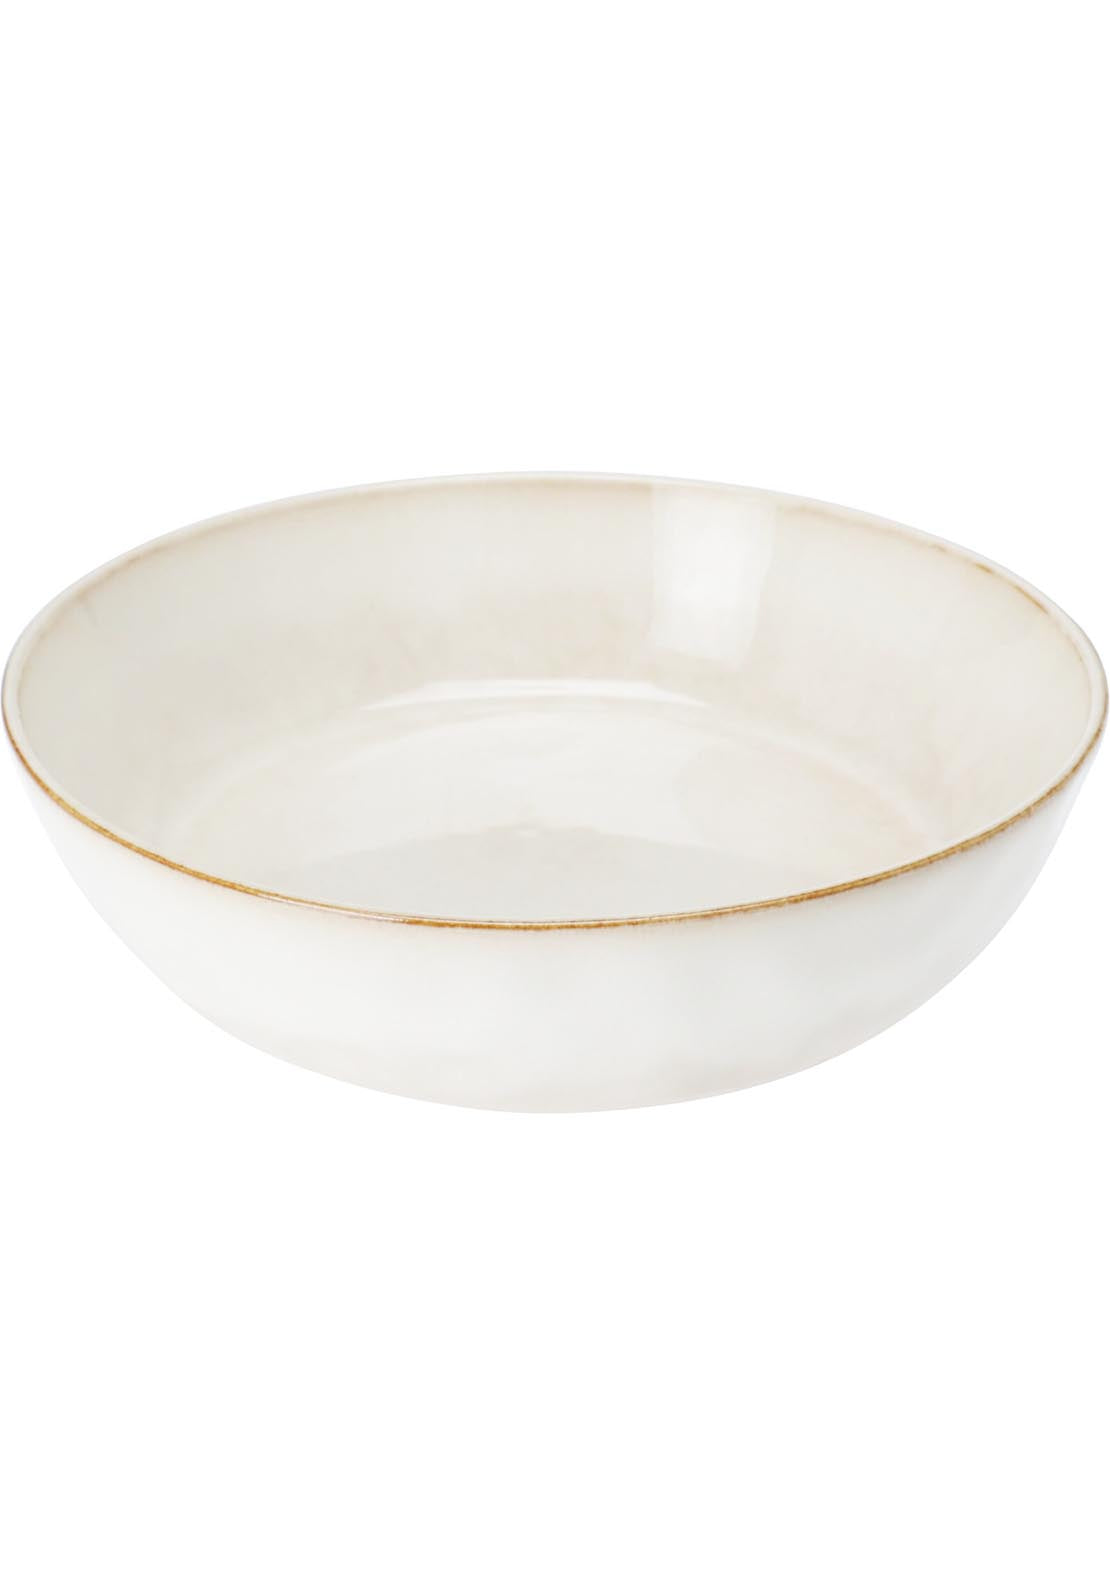 The Home Dining Stoneware Bowl 1000ml 1 Shaws Department Stores